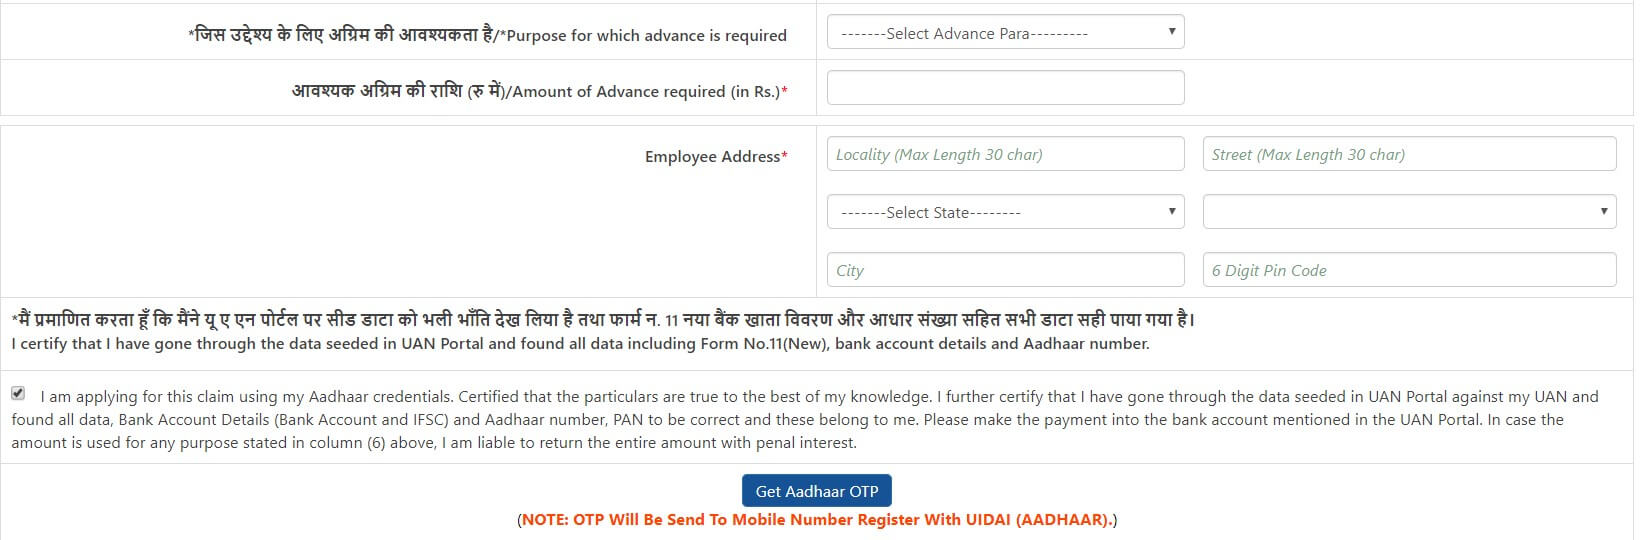 pf withdraw reason and amount required